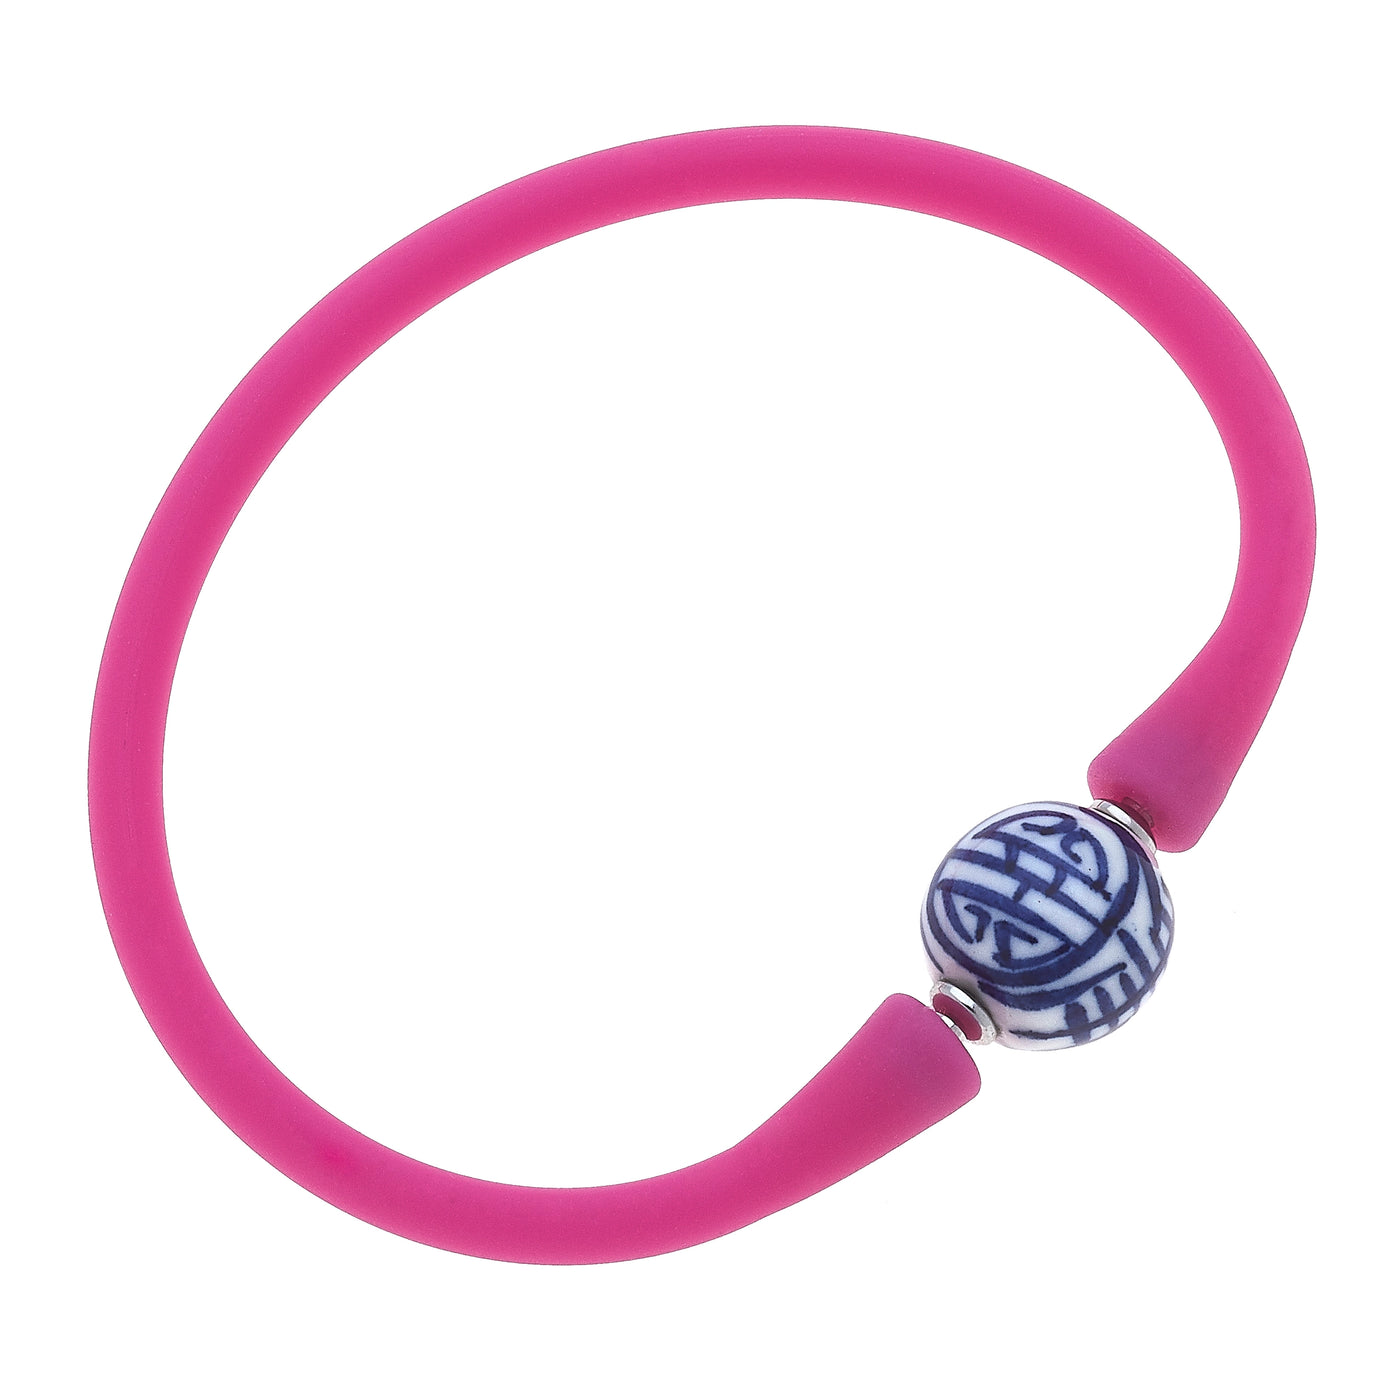 Magenta silicone bracelet with a small chinoiserie bead